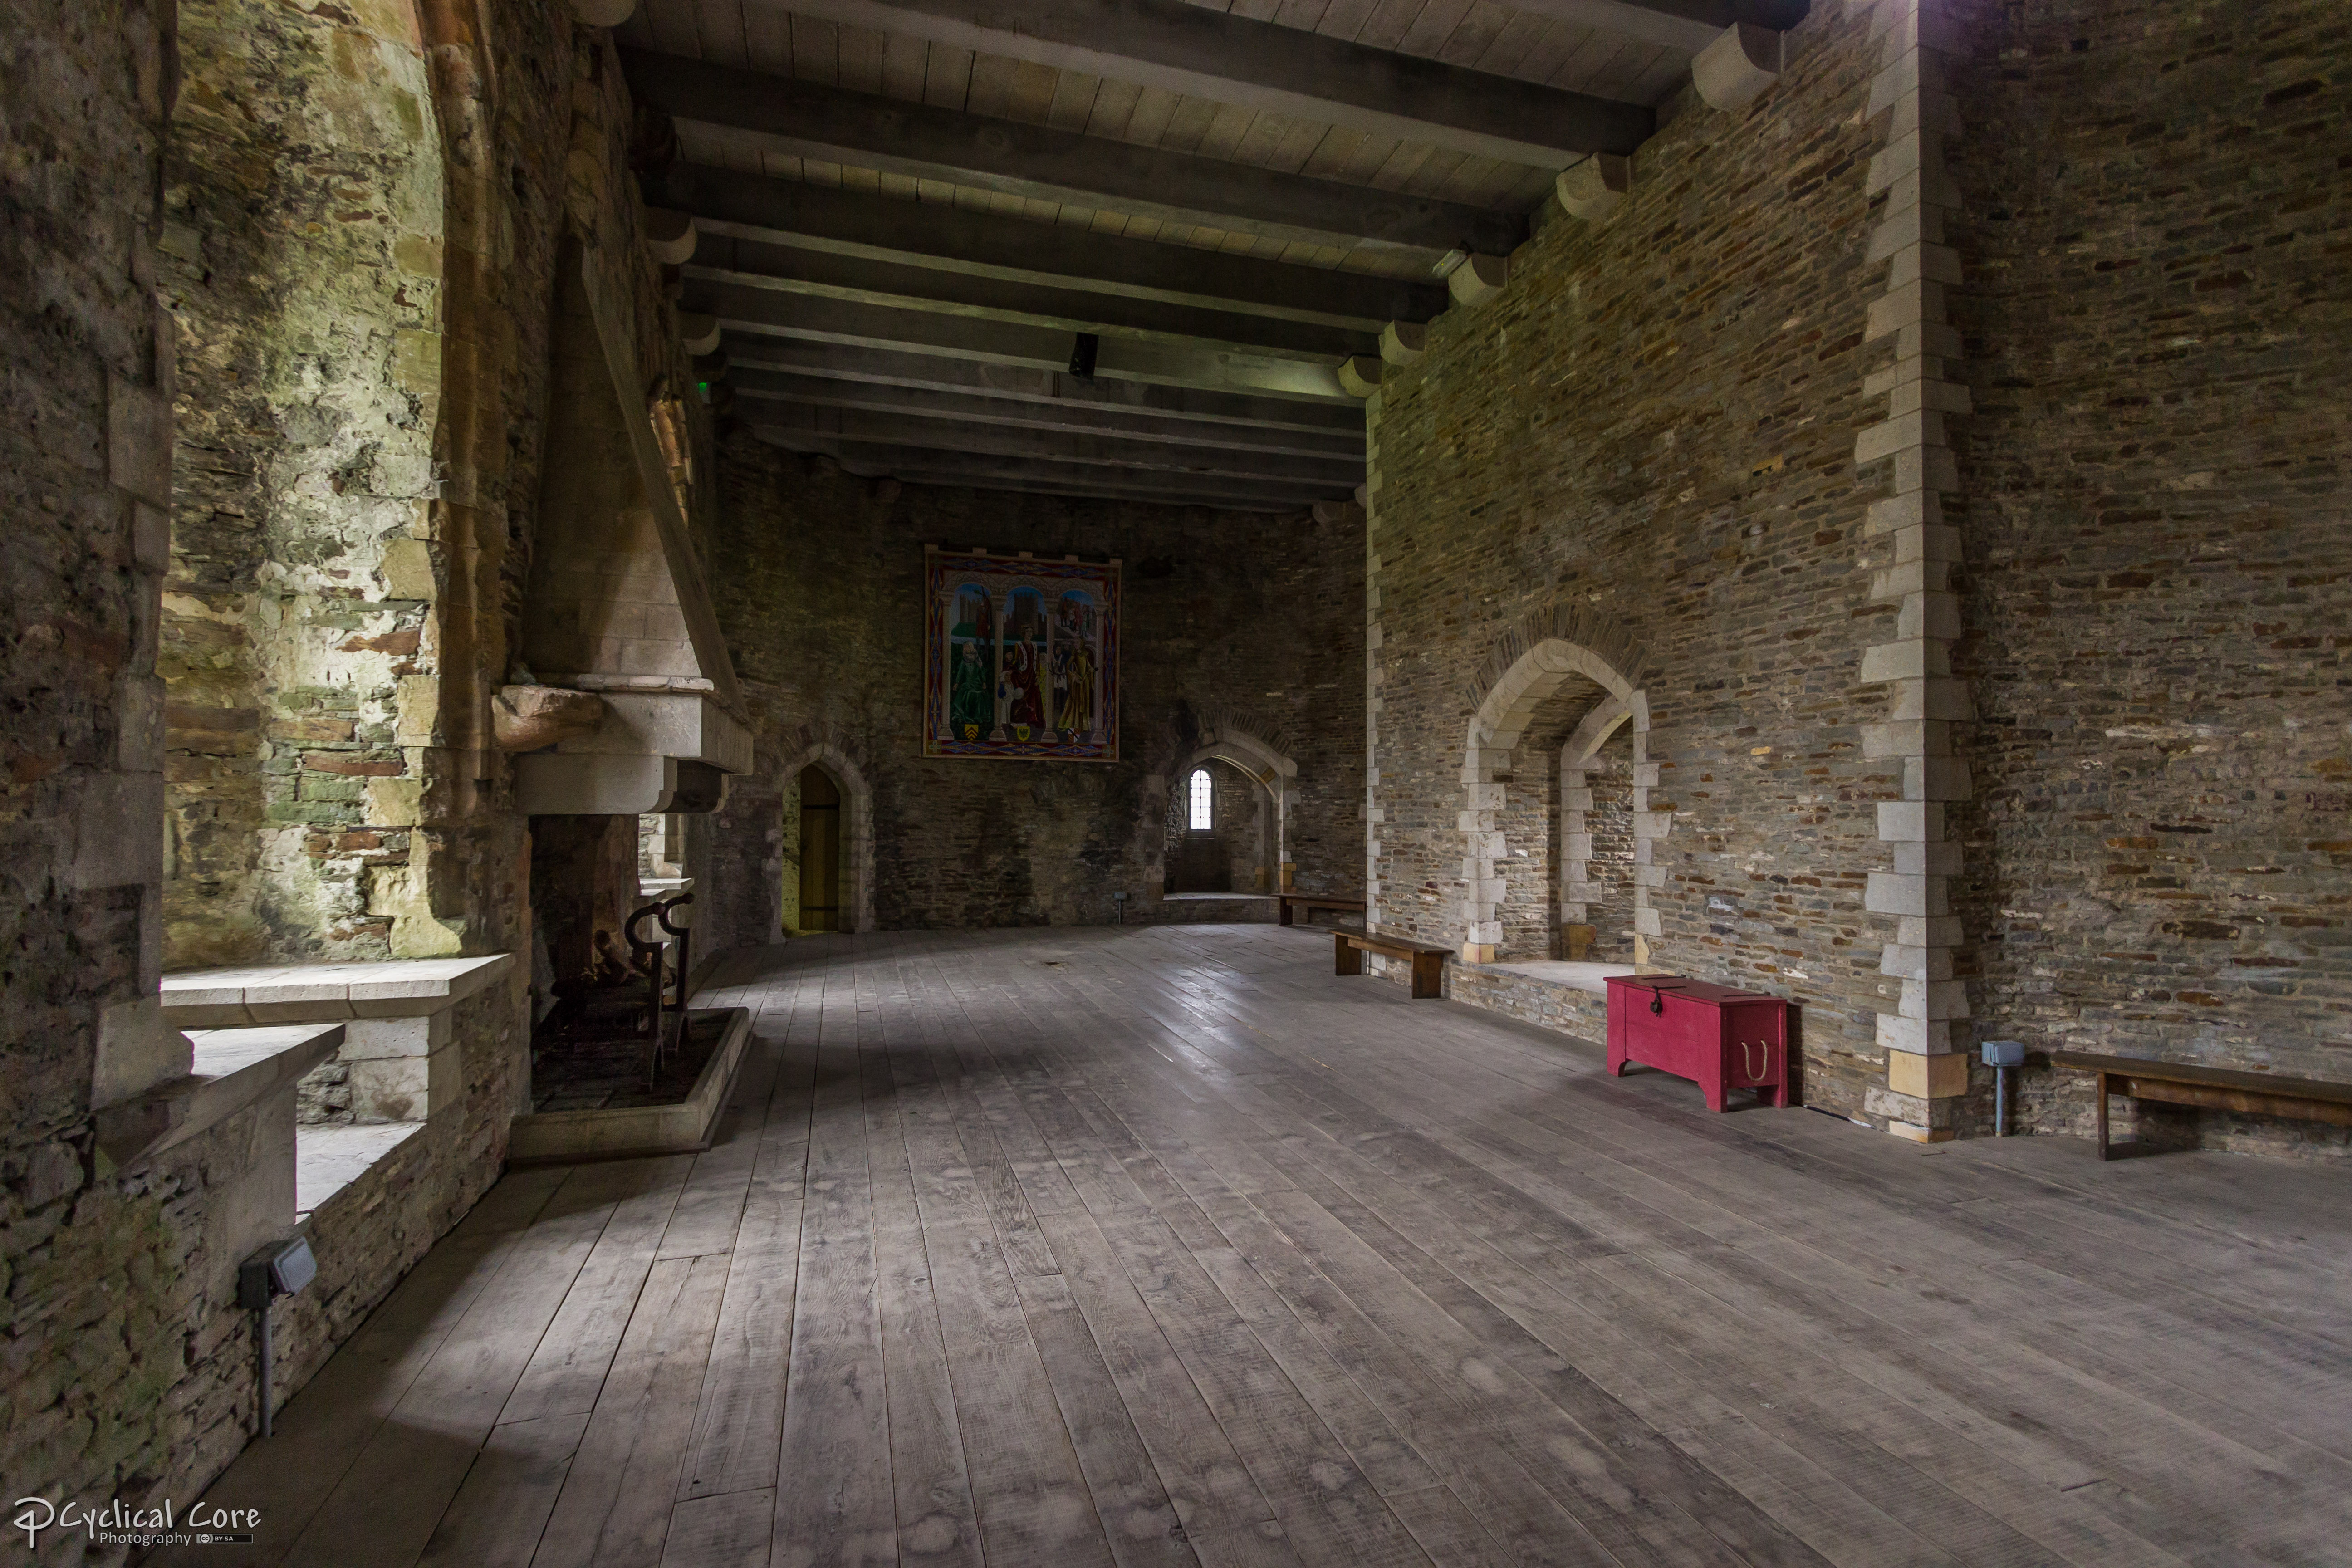 Caerphilly Castle - Interior Room by CyclicalCore on DeviantArt